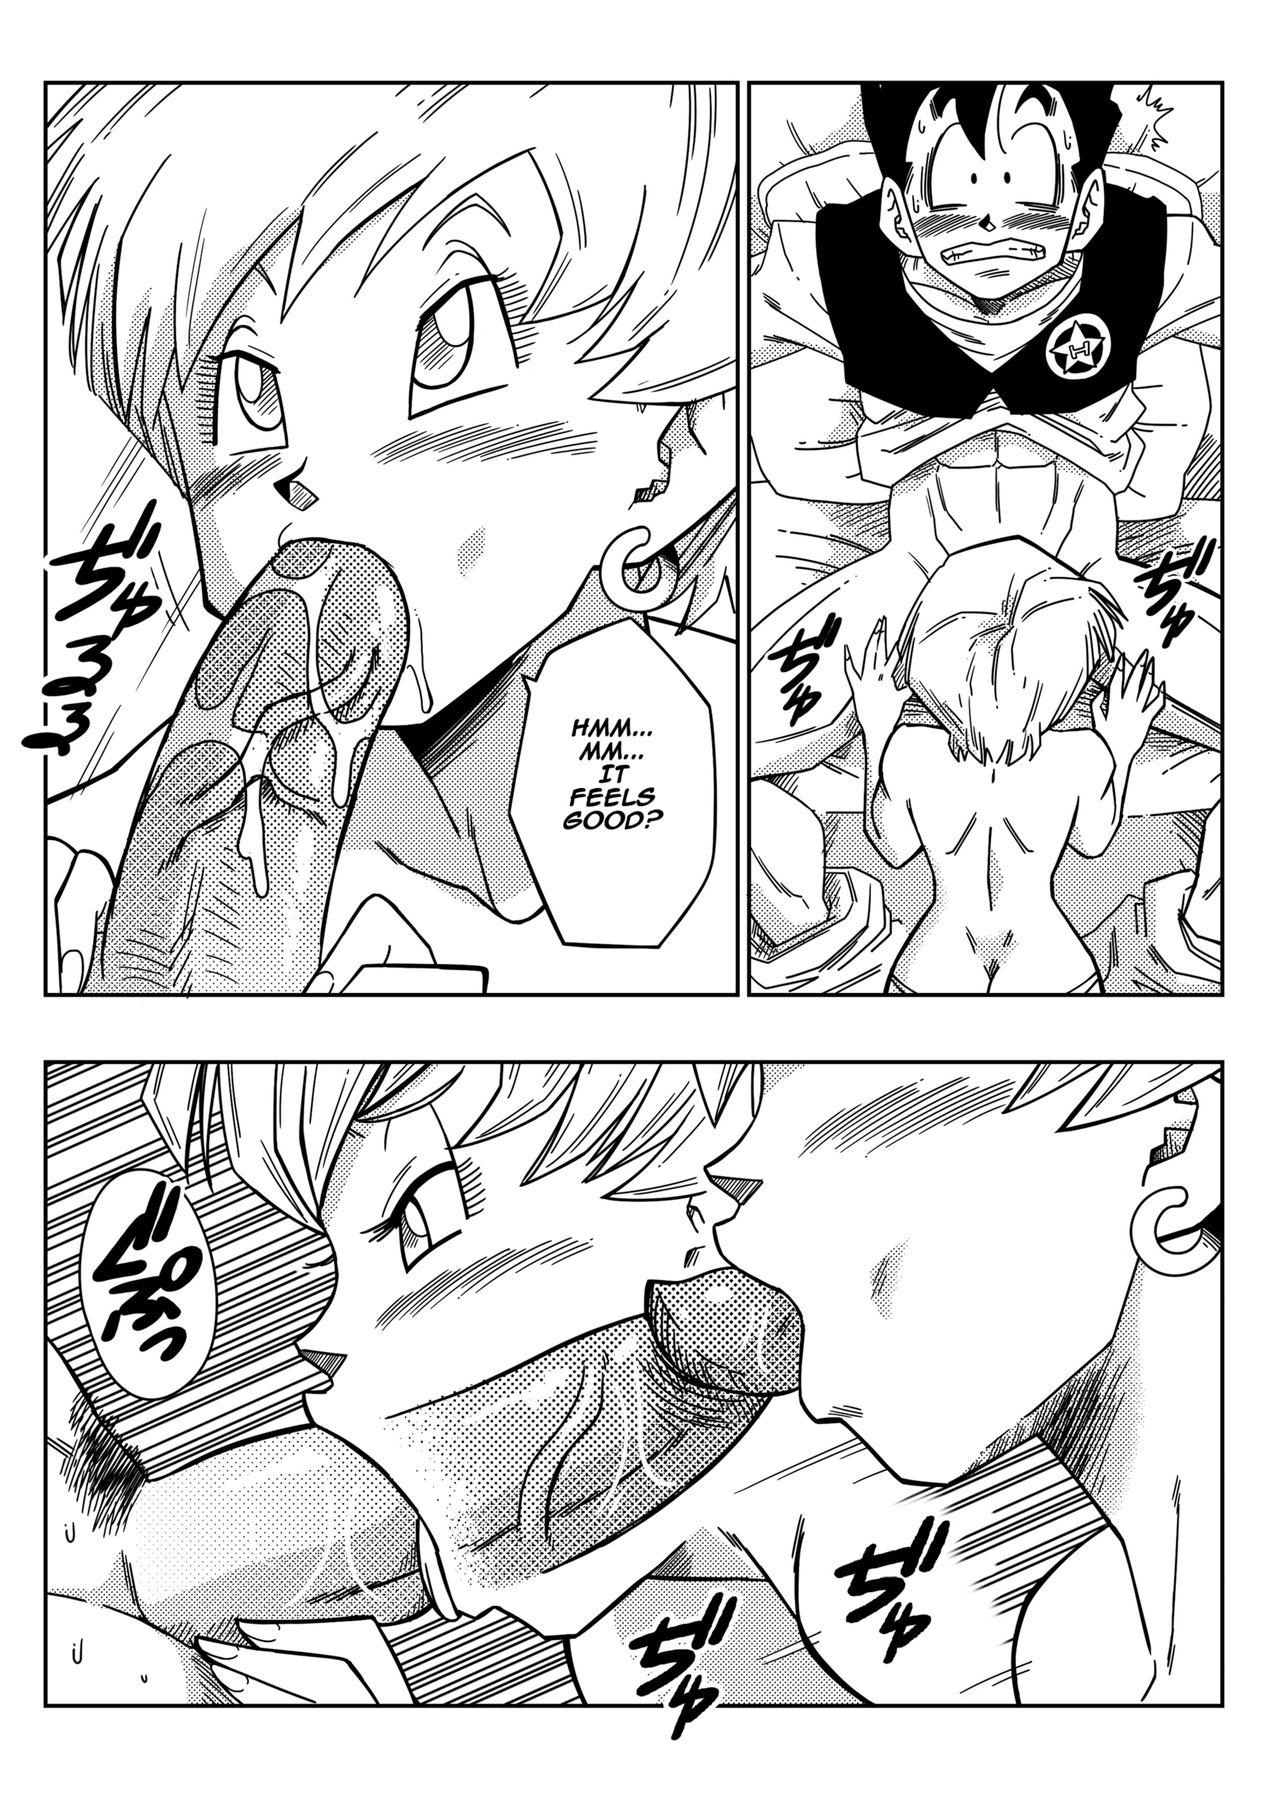 Fantasy LOVE TRIANGLE Z PART 1 - Gohan Meets Erasa "Let's Make A Lot Of Sex, OK? - Dragon ball z Sharing - Page 10